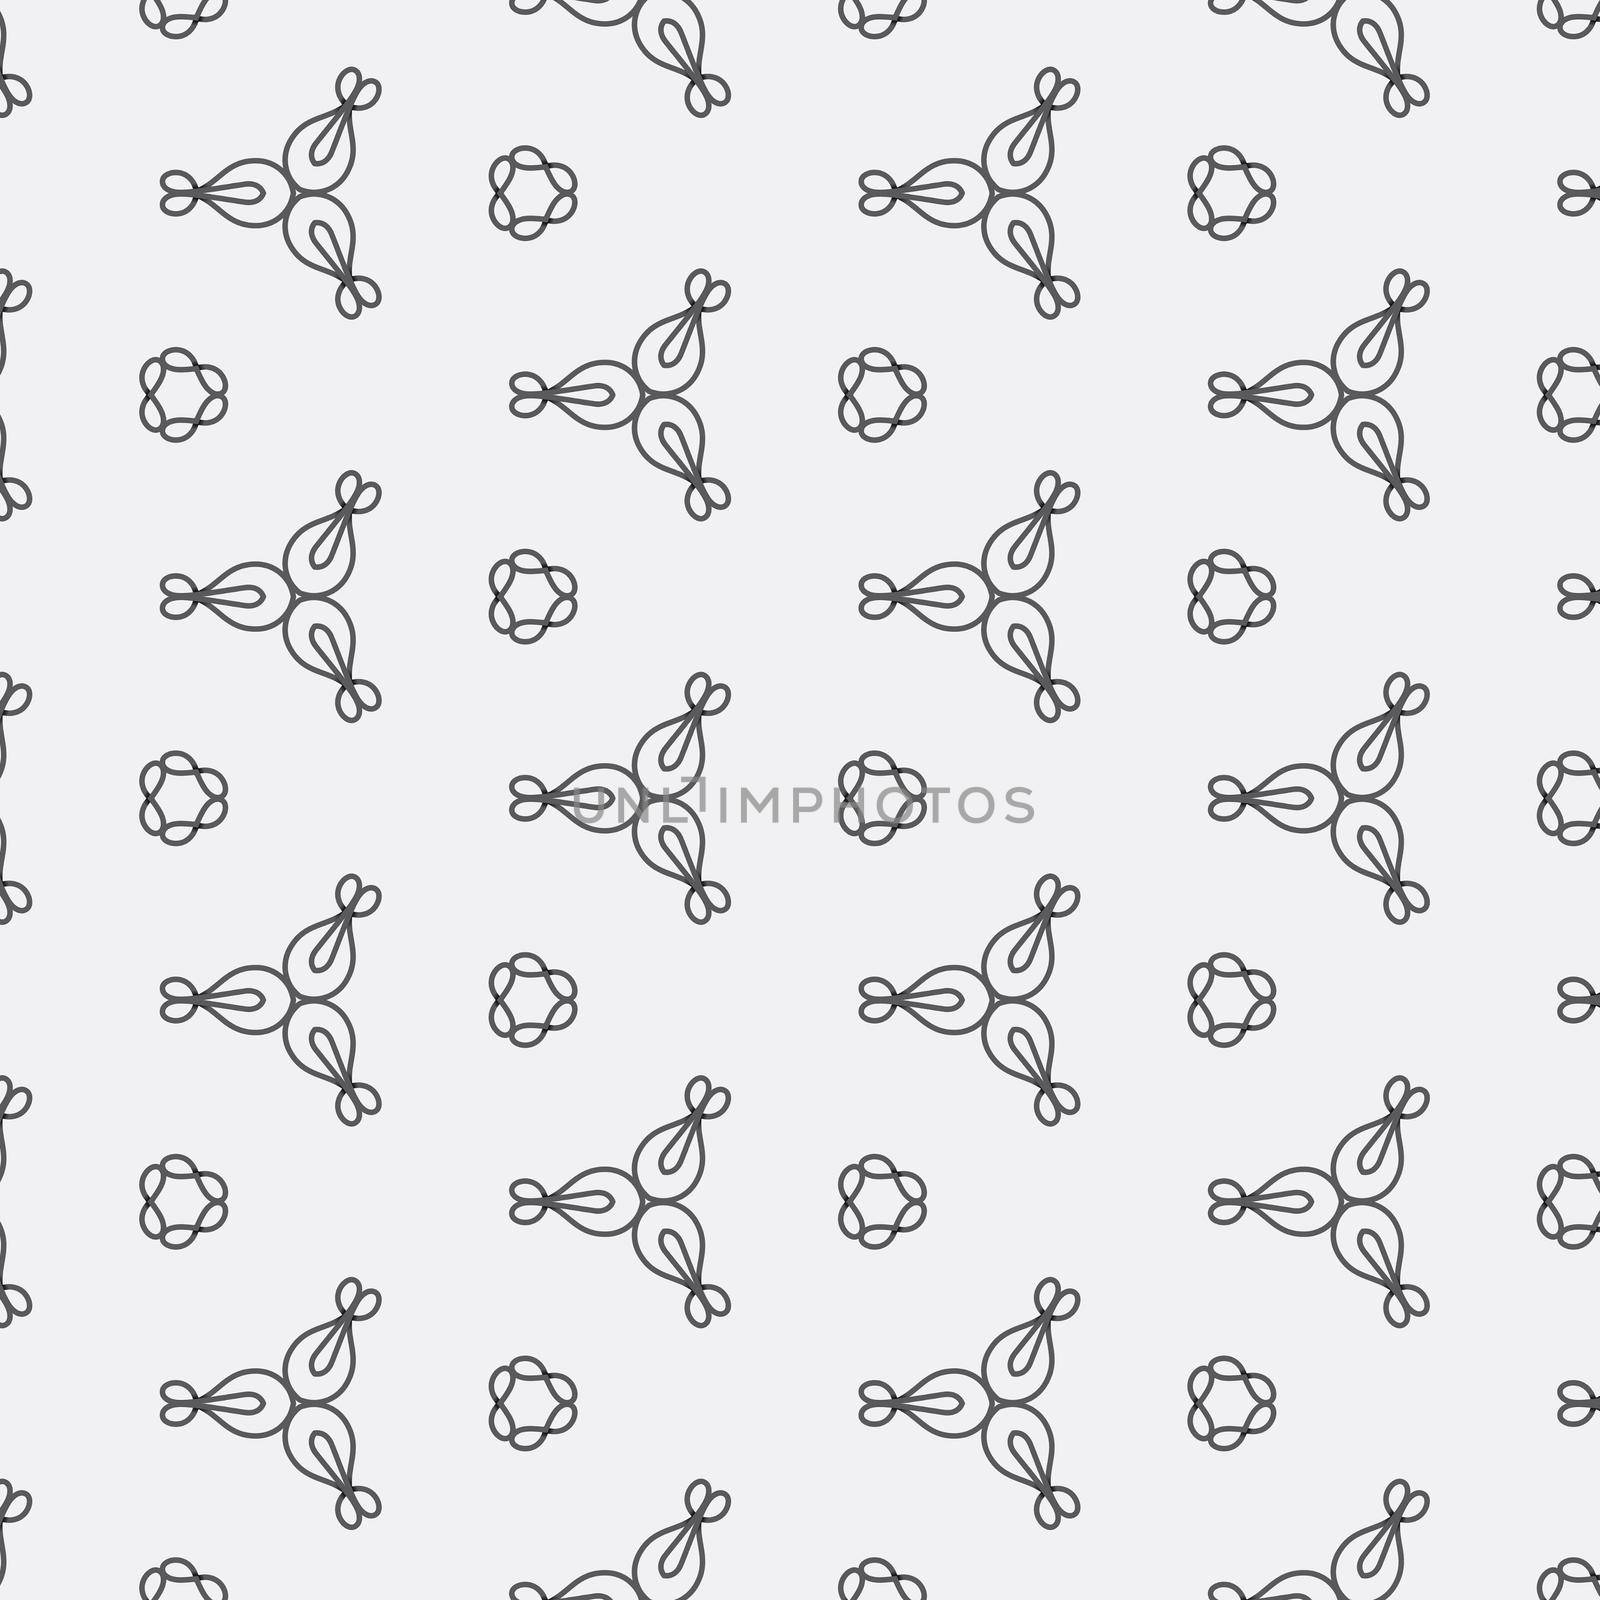 Beautiful monochromatic symmetrical designs on solid sheet of wallpaper. Concept of home decor and interior designing by tabishere